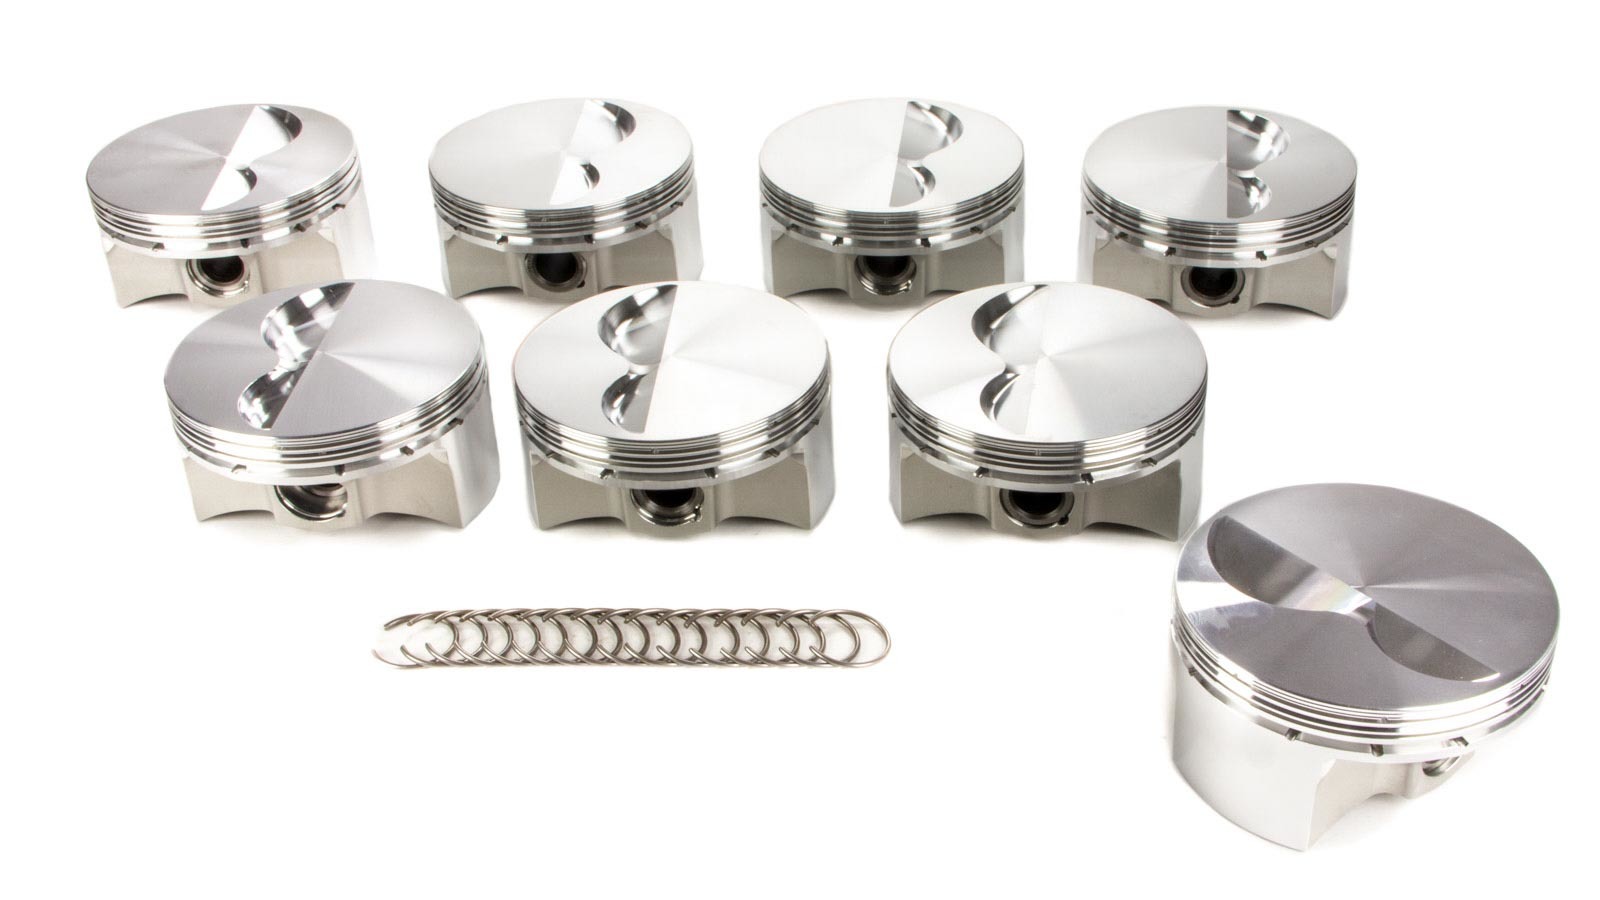 JE Pistons 258030 Piston, F.S.R. Tour Series GP, Forged, 4.040 in Bore, 0.043 in x 0.043 in x 3.0 mm Ring Grooves, Minus 5.00 cc, Small Block Chevy, Set of 8